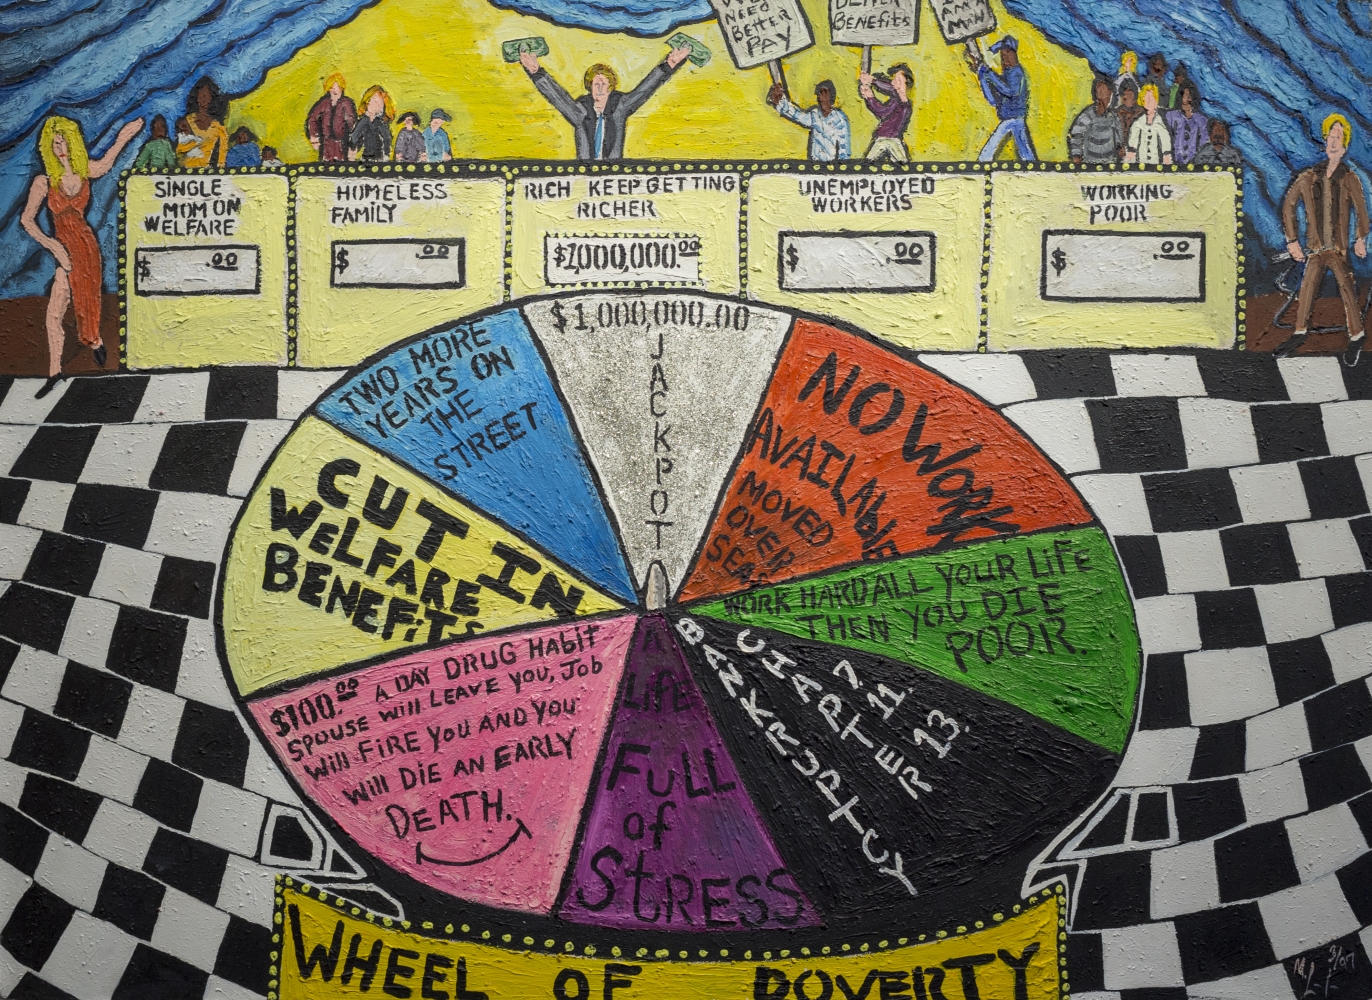 The Wheel Of Poverty, 1997
Acrylic on Textured Canvas
48 x 66 inches